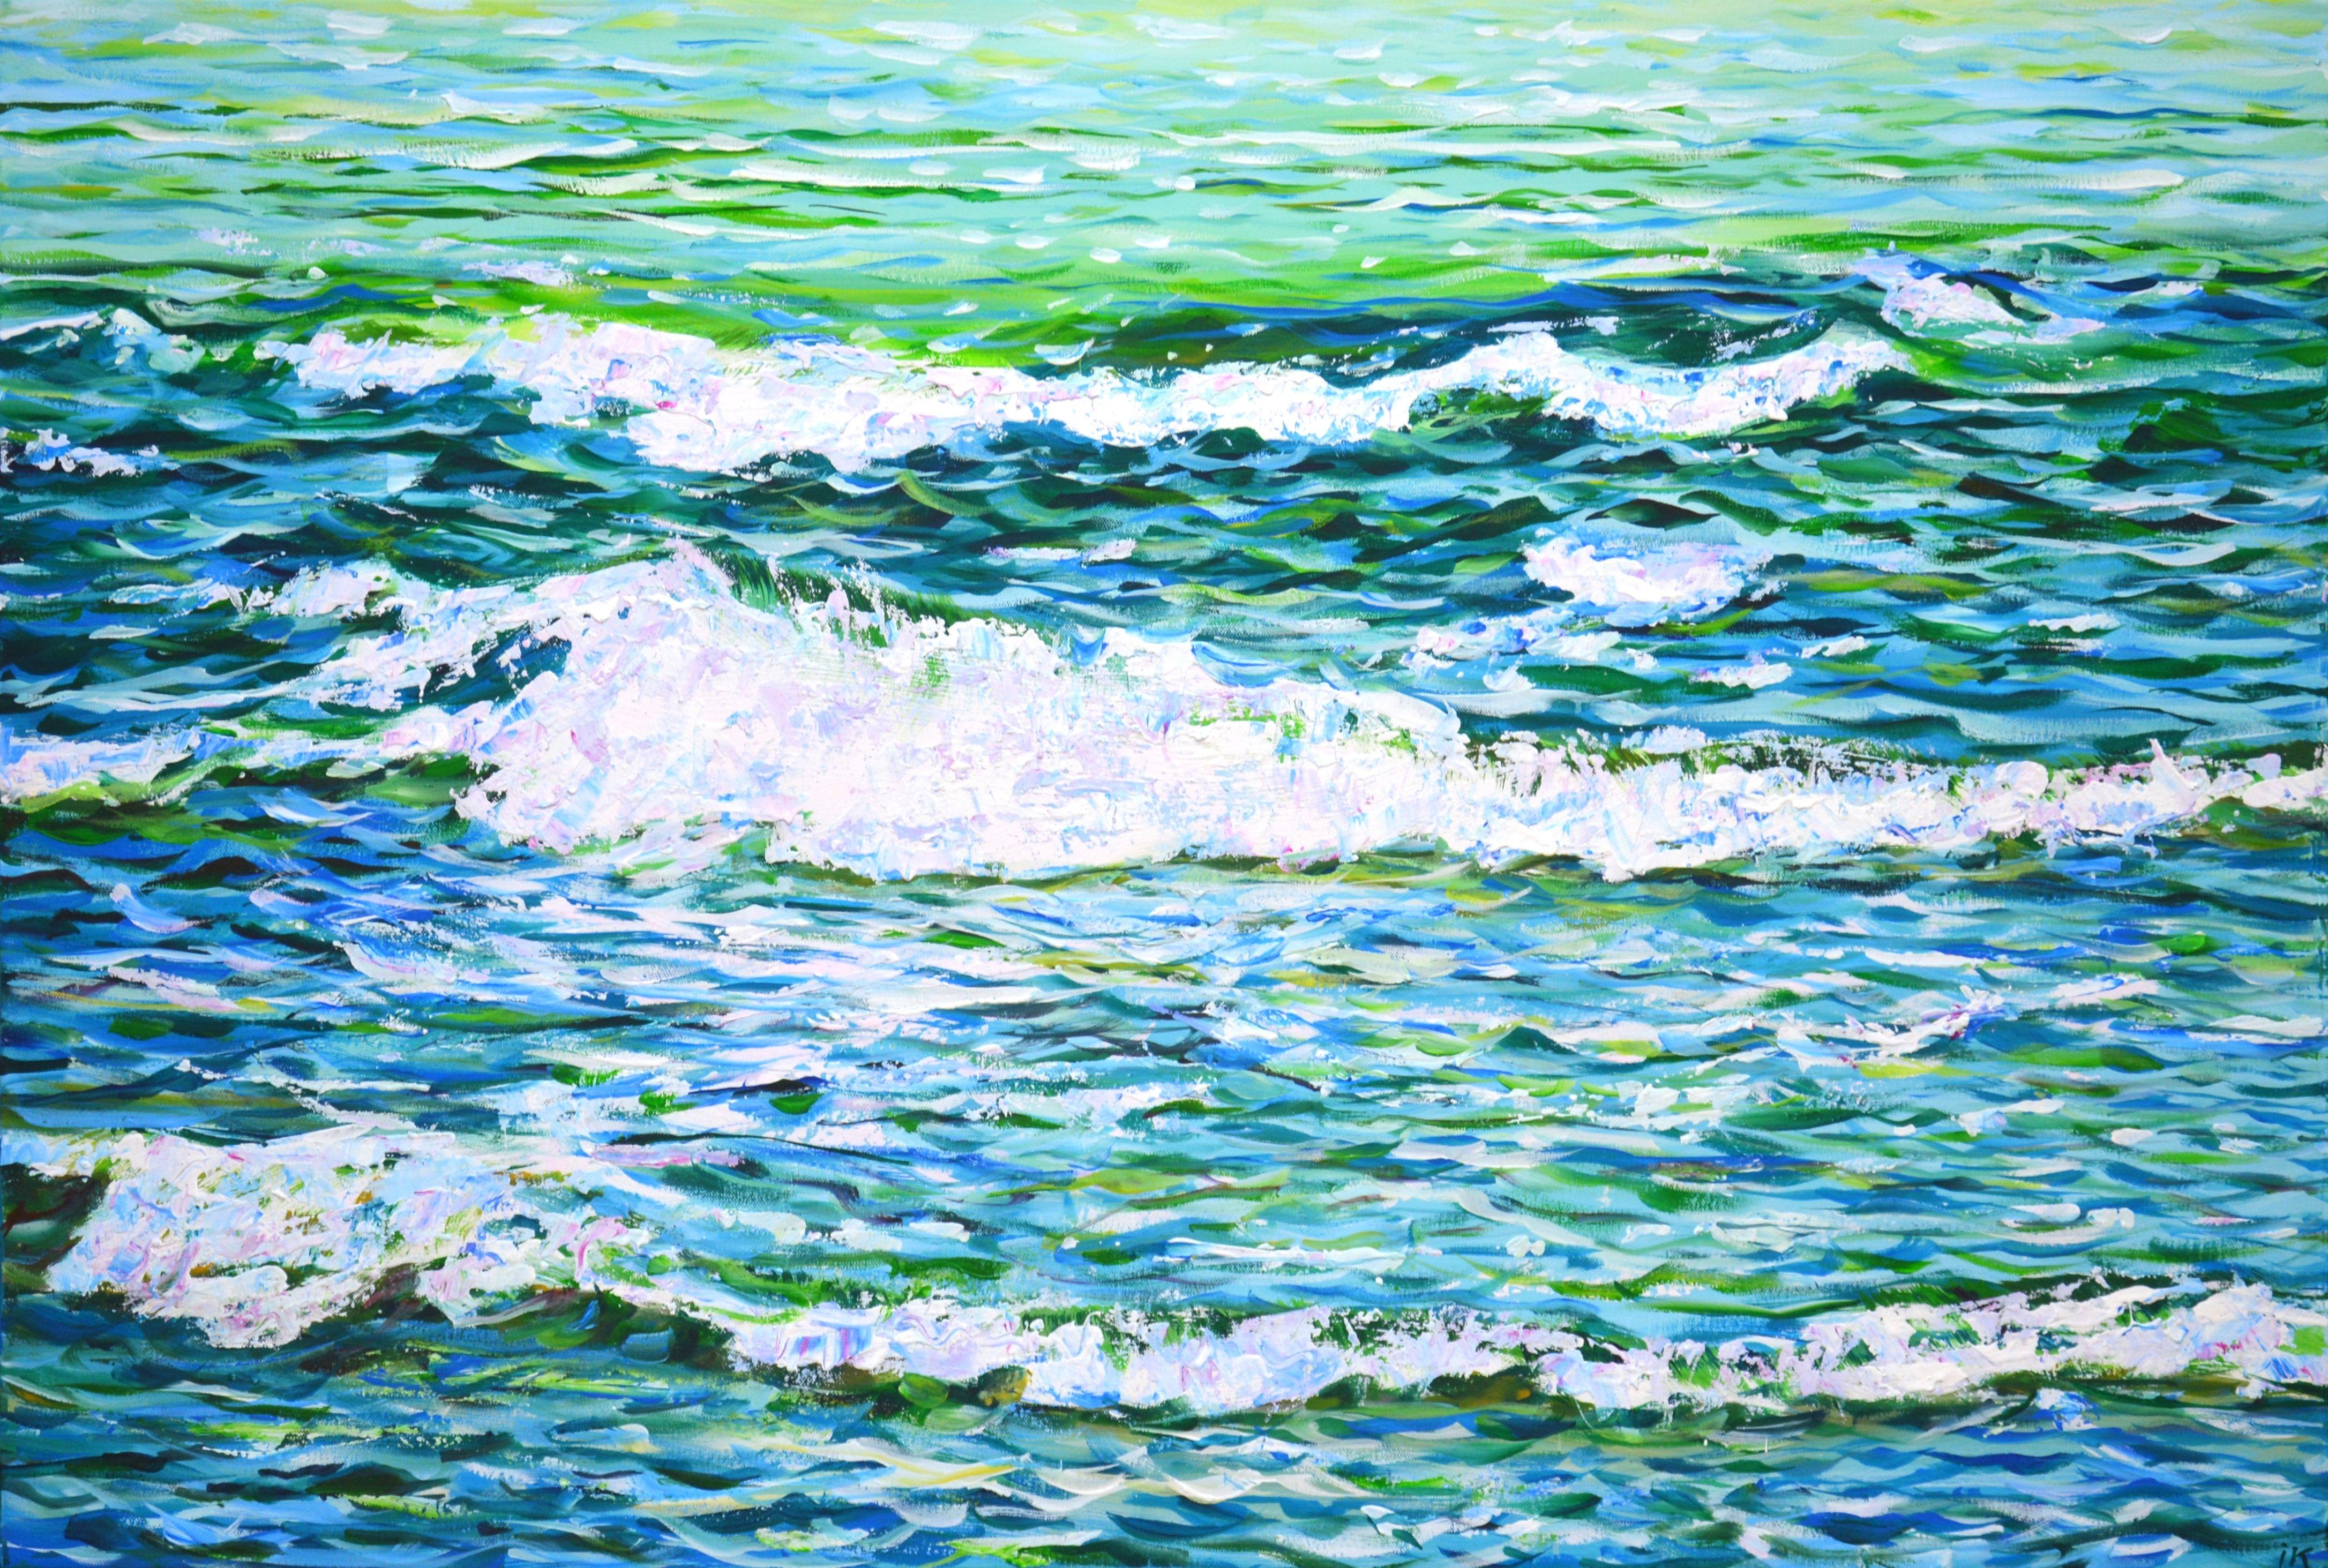 Waves. Waves. The ocean breathes with free wind, and beyond it - amazing countries. Like eternity, the ocean is huge and the wave is calm. A rich palette of turquoise, blue, white shades emphasize the warm glow of the sun and the movement of water.